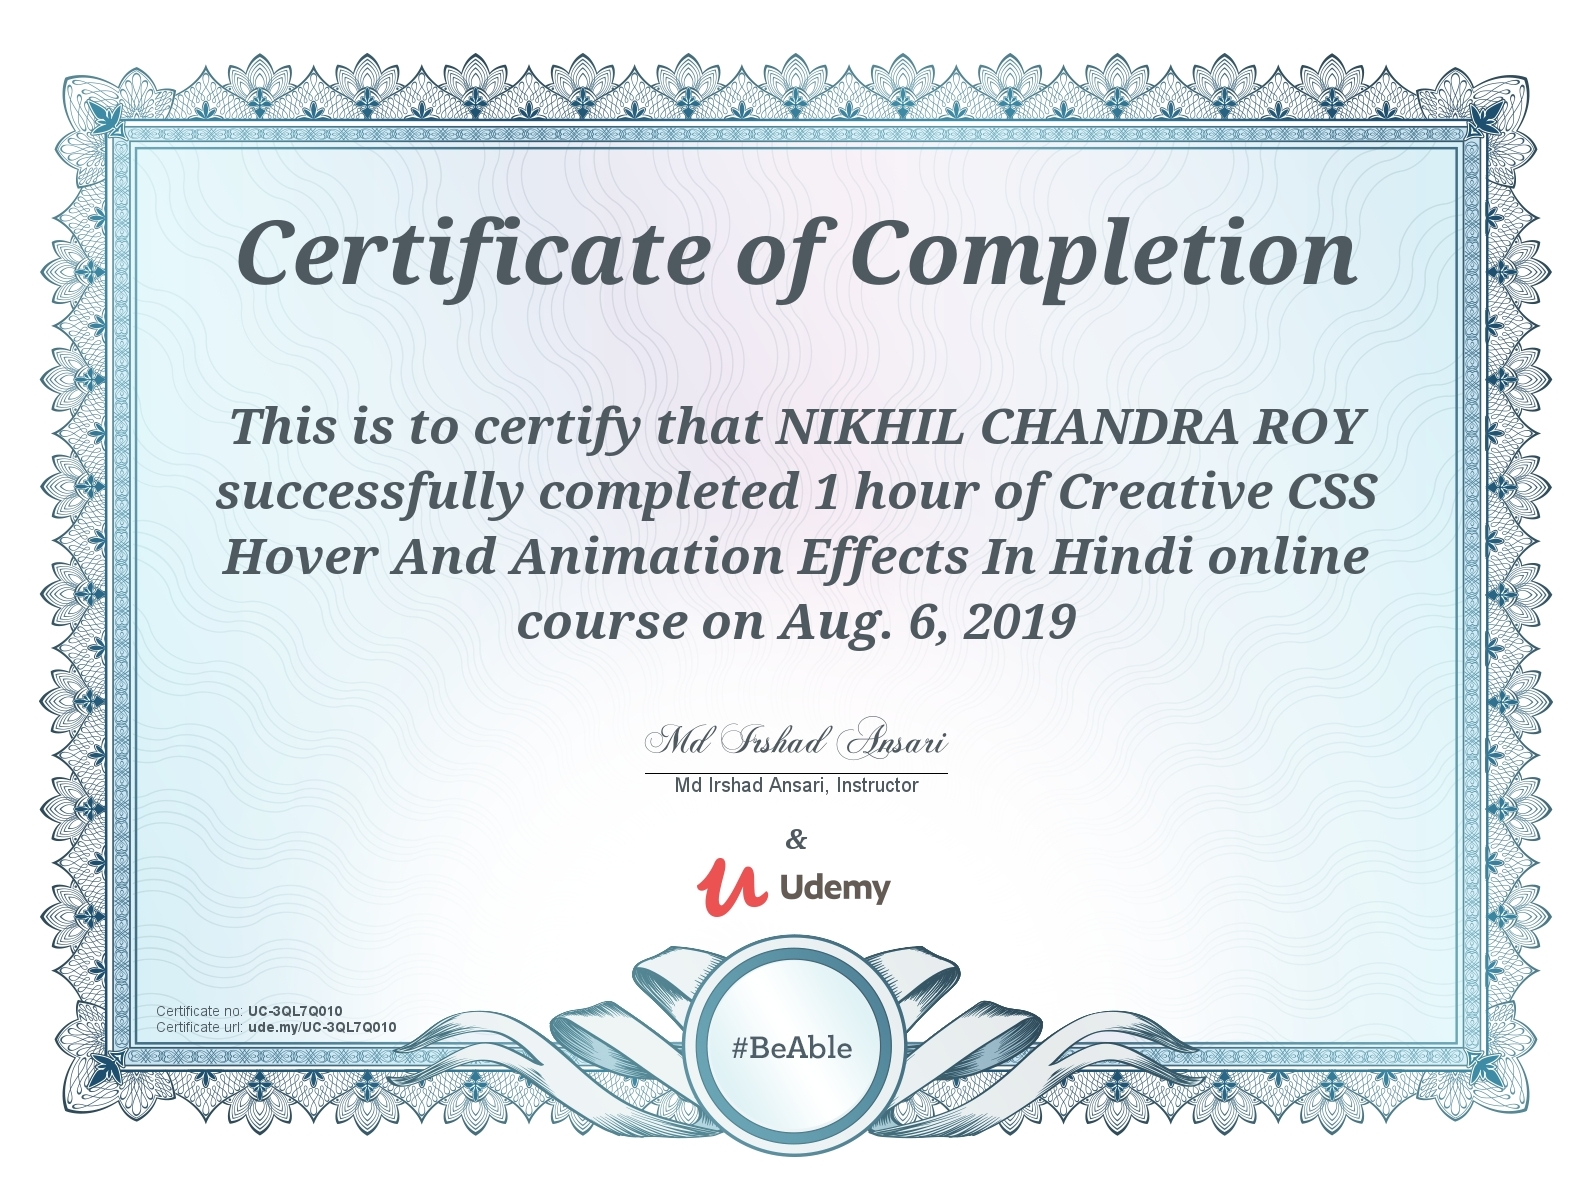 Udemy Certificate over Css Animation effects. by NIKHIL CHANDRA ROY on  Dribbble